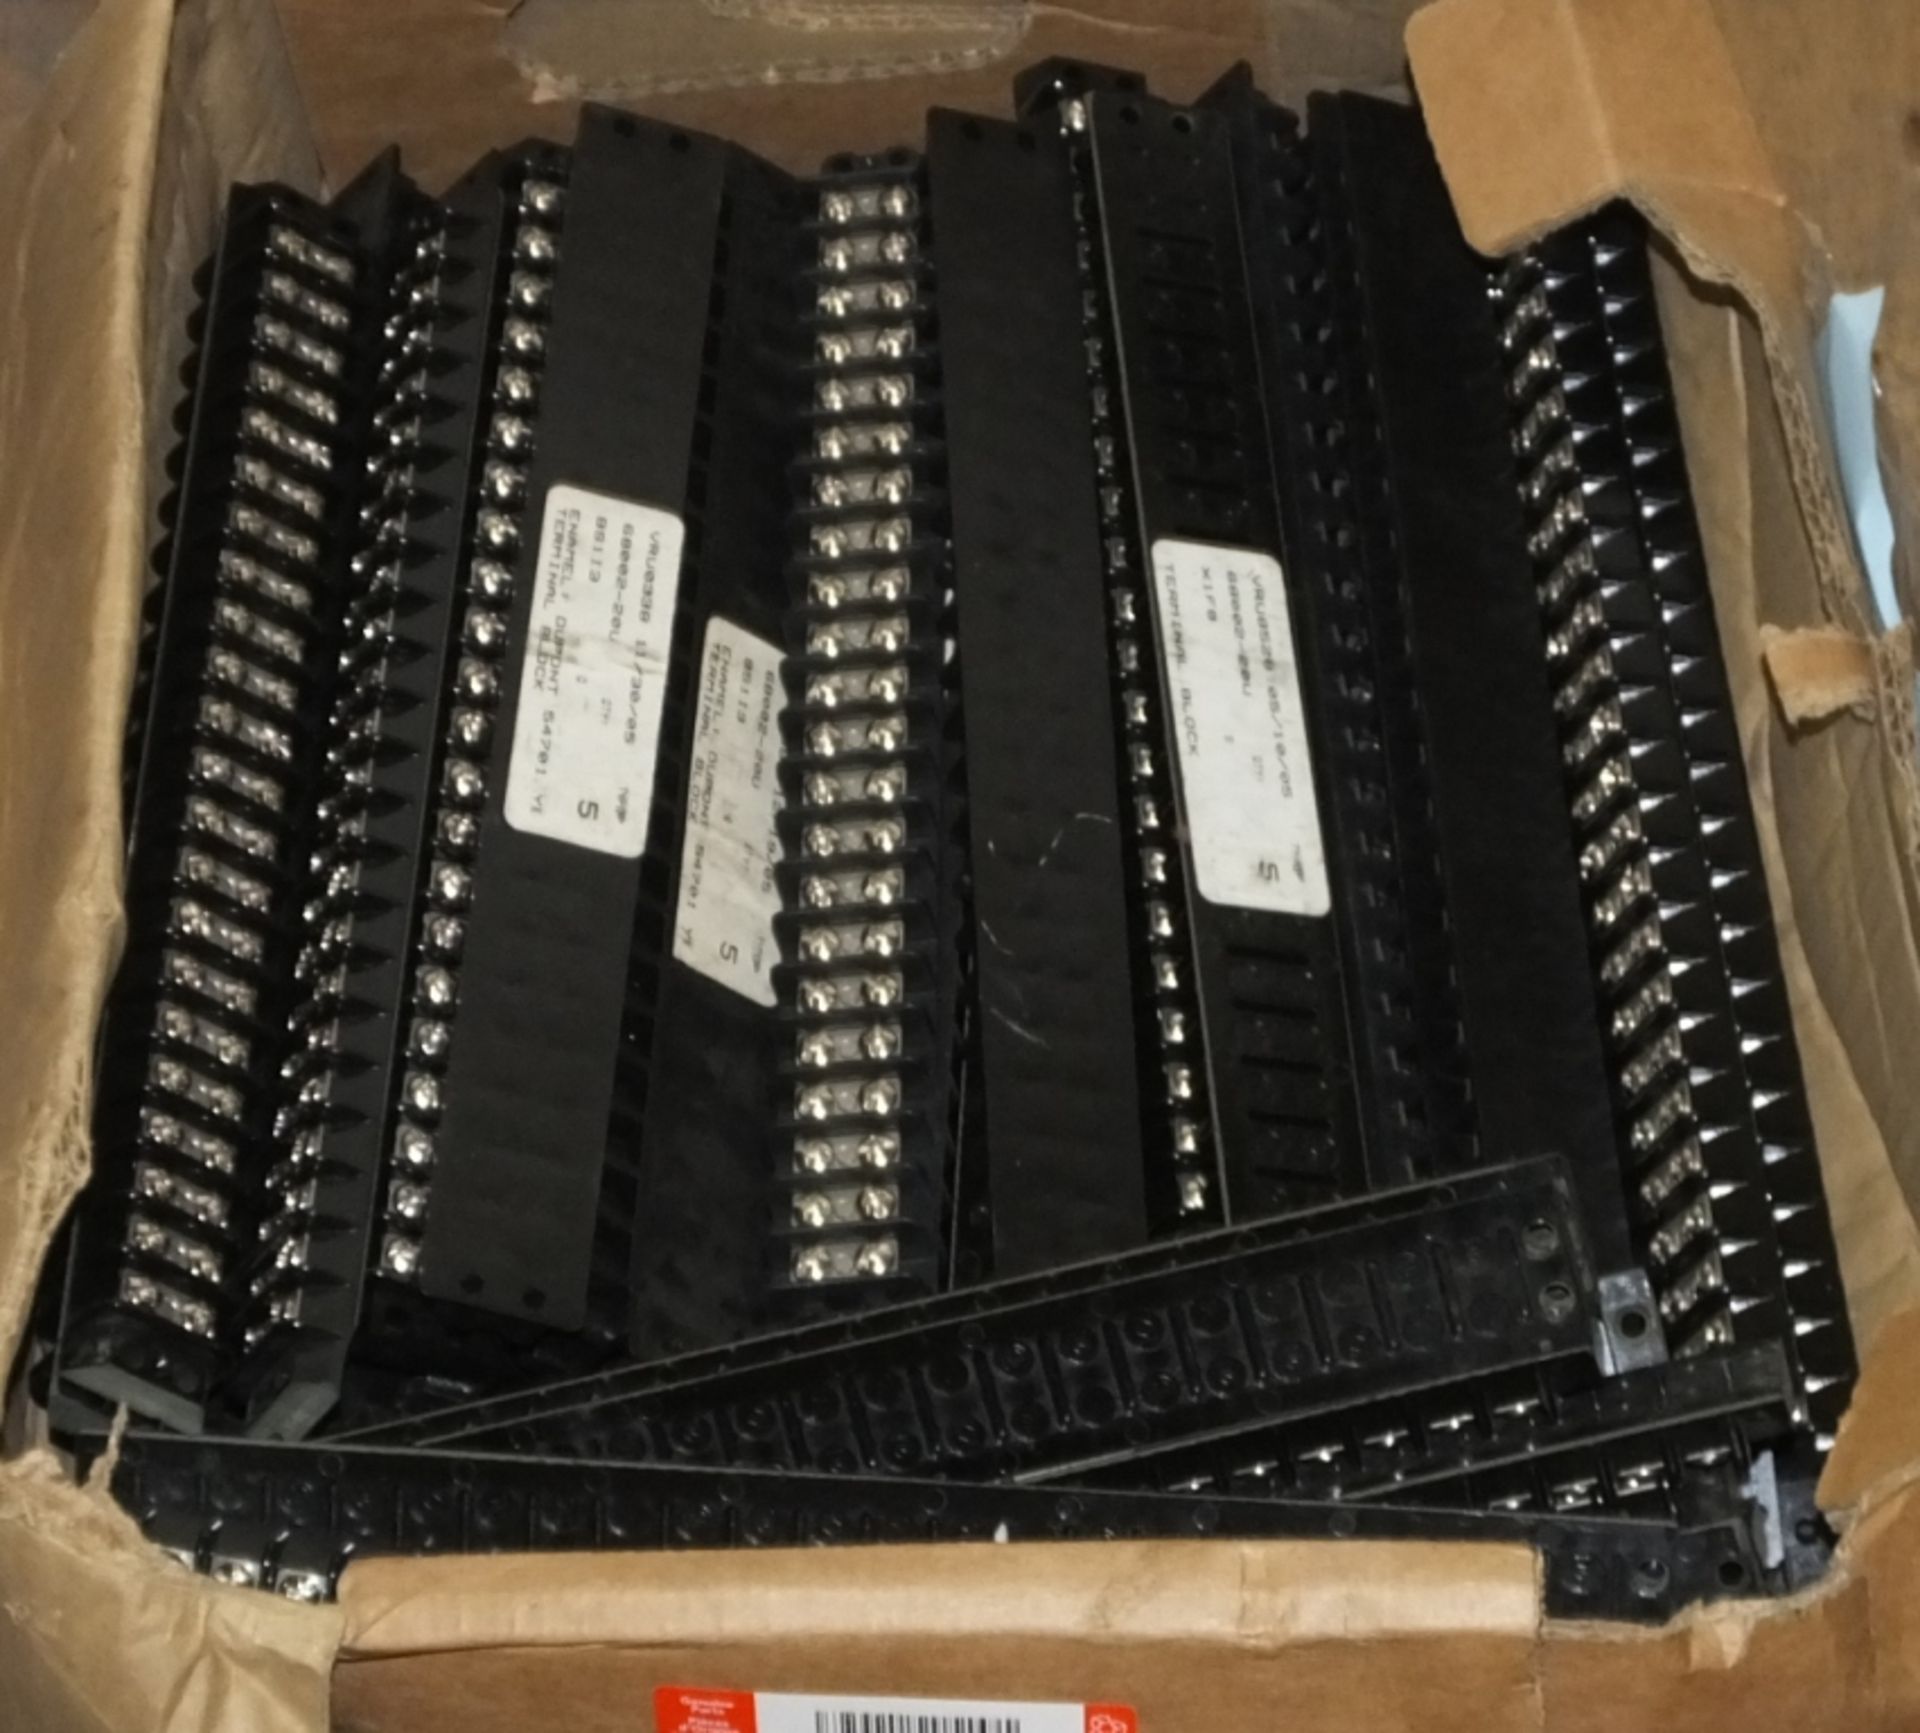 5x Boxes of Heavy Duty Cable Strip Connectors - Image 3 of 6